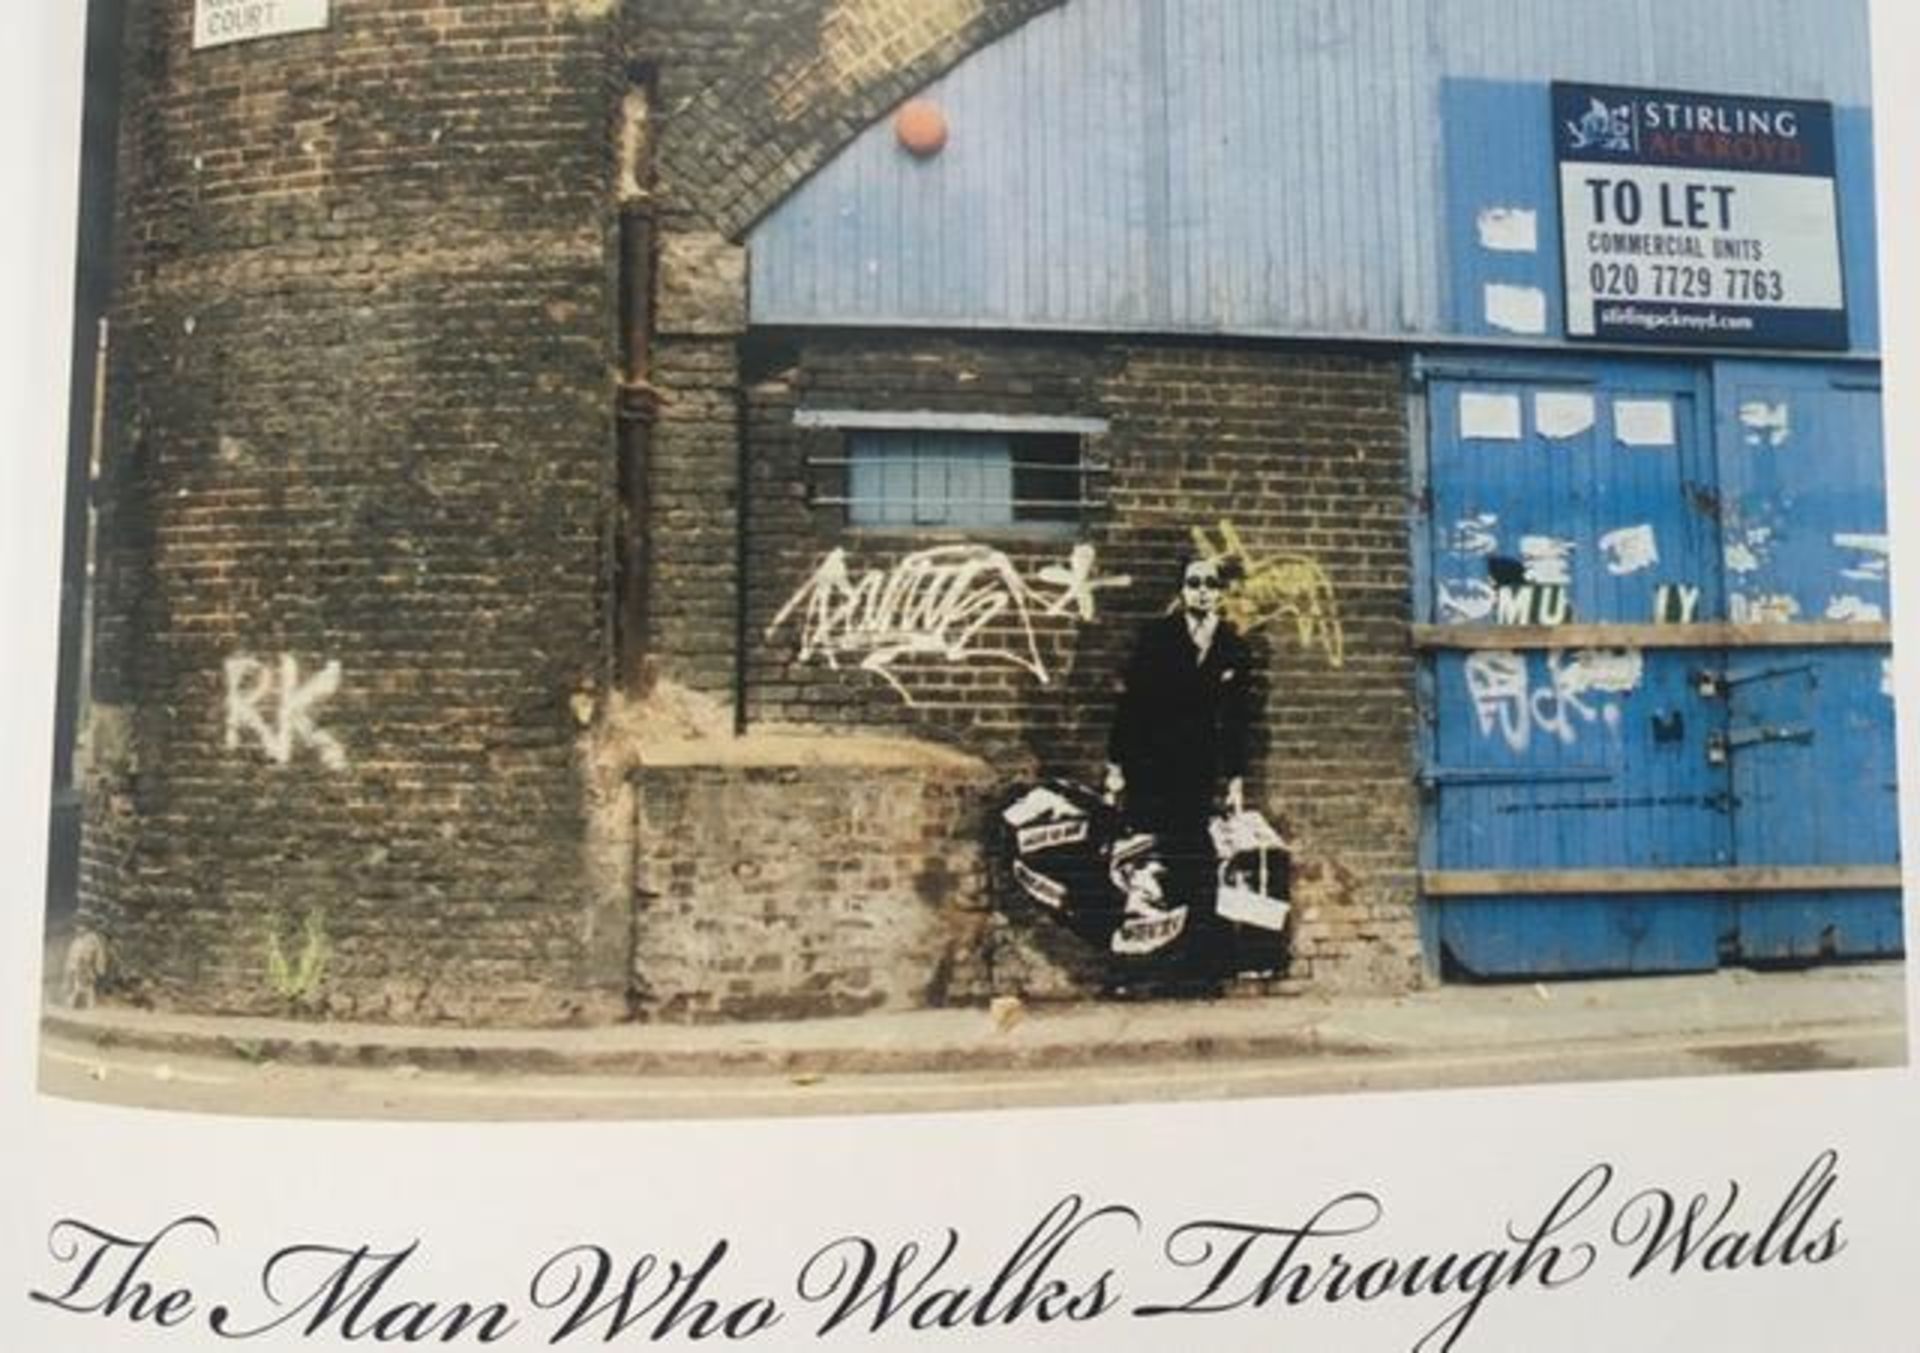 Blek Le Rat (B 1952-) 'Getting Through Walls', Double Levered Cardback Book, 2nd Edition, 2008 - Image 10 of 13